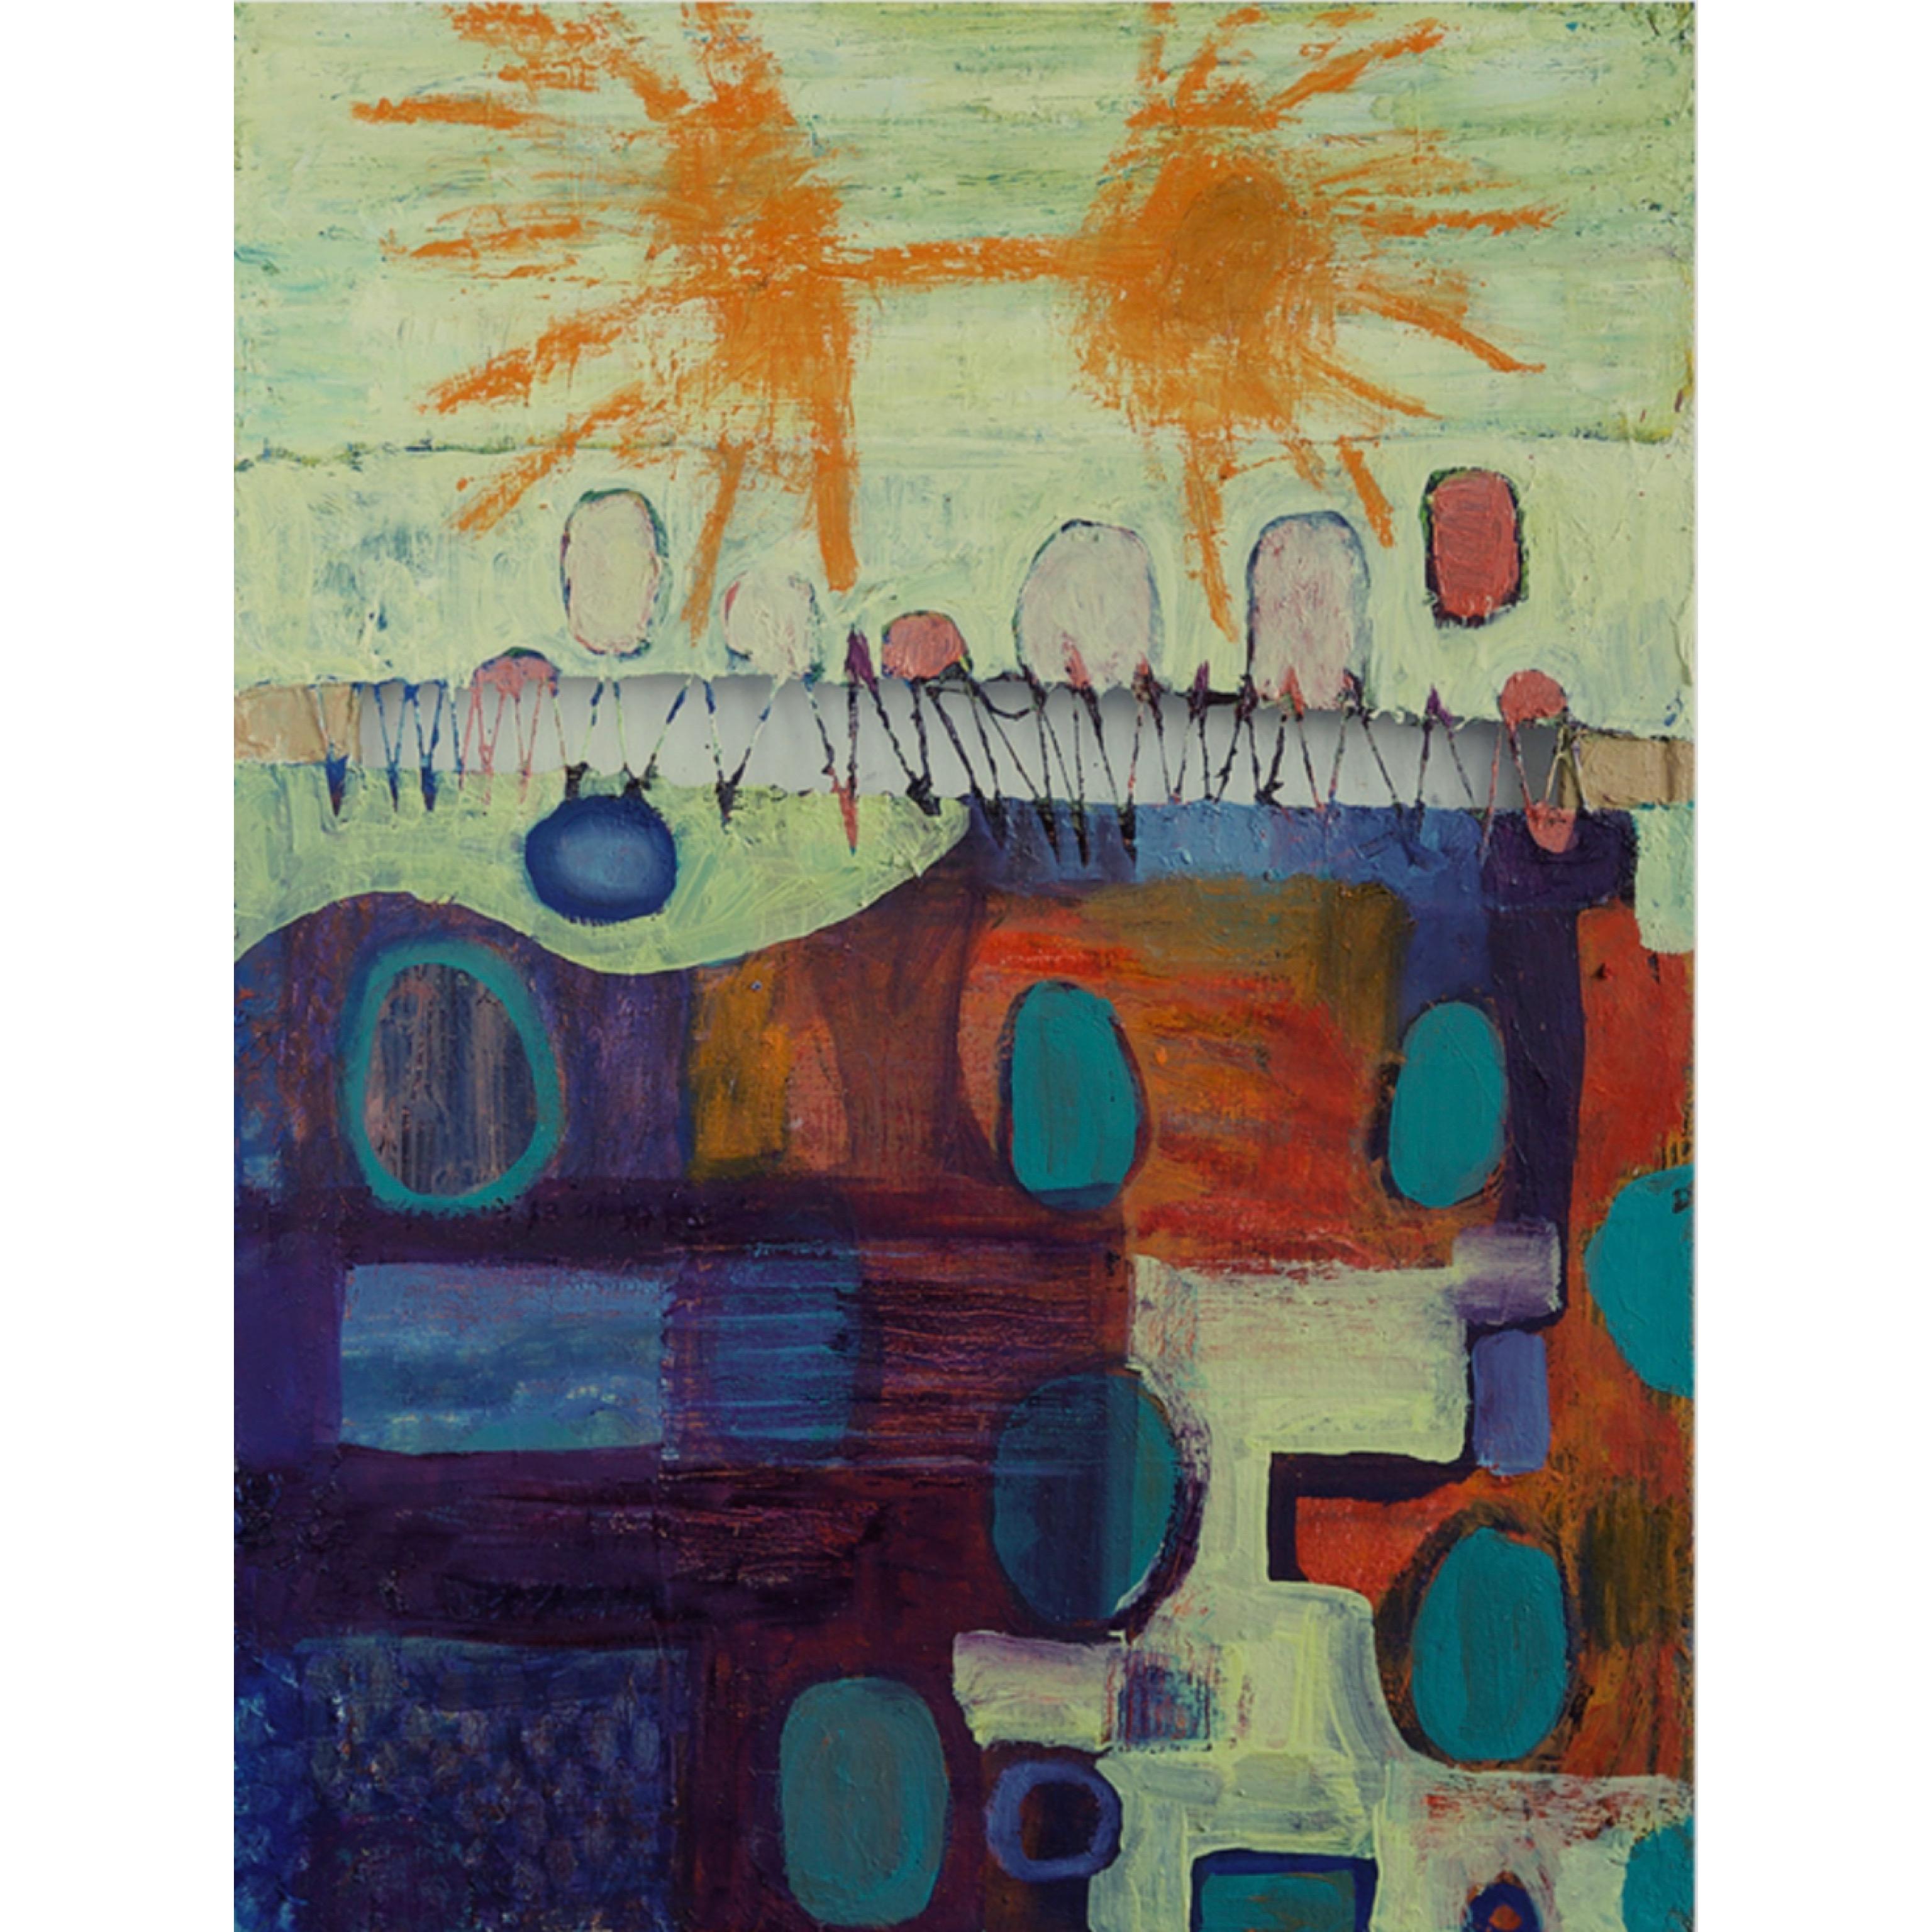 Cecilia André  Abstract Painting - Two Suns, stitched canvas urban landscape abstraction